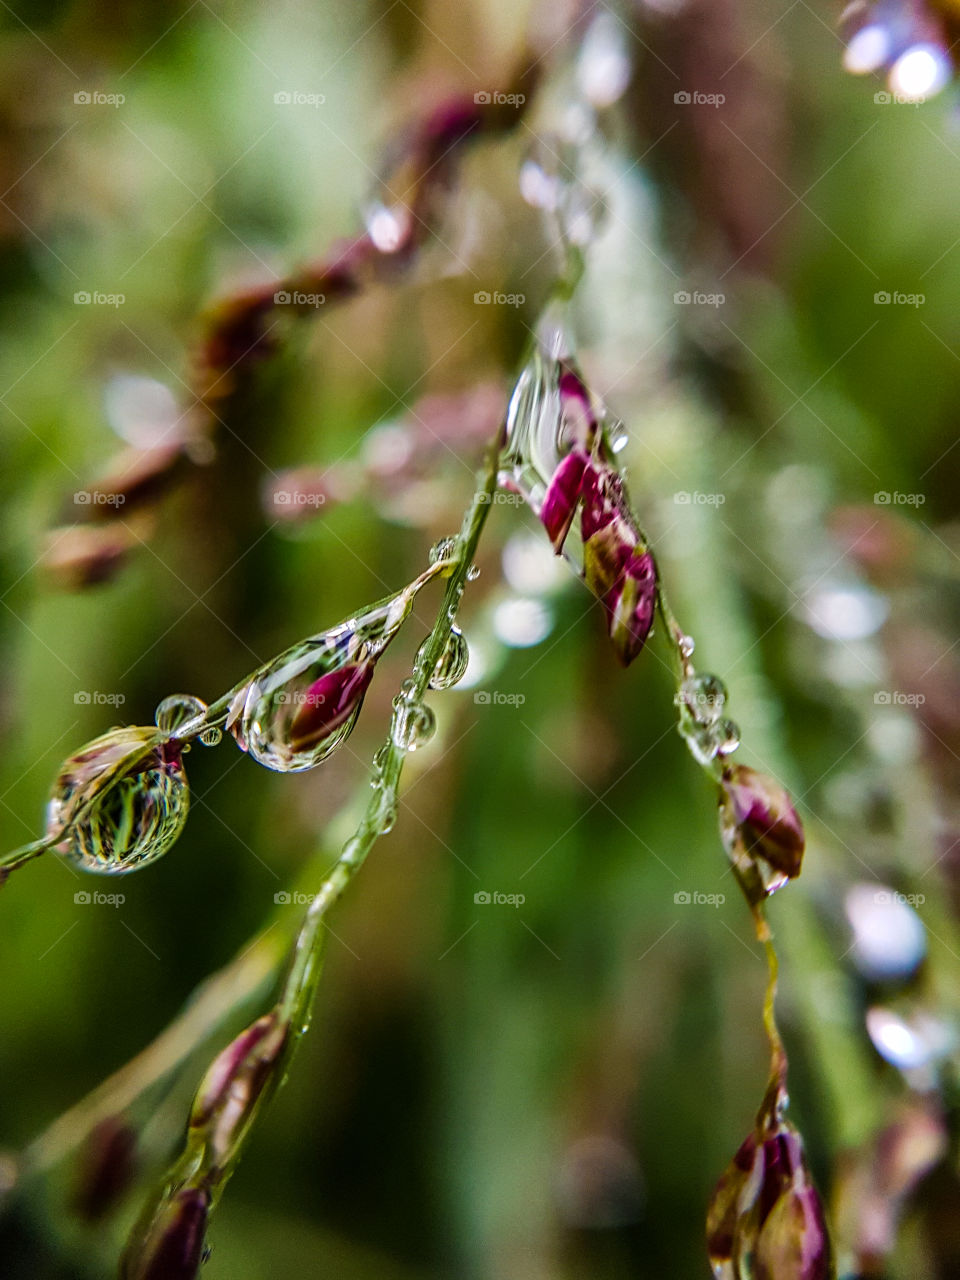 water droplets on grass seeds